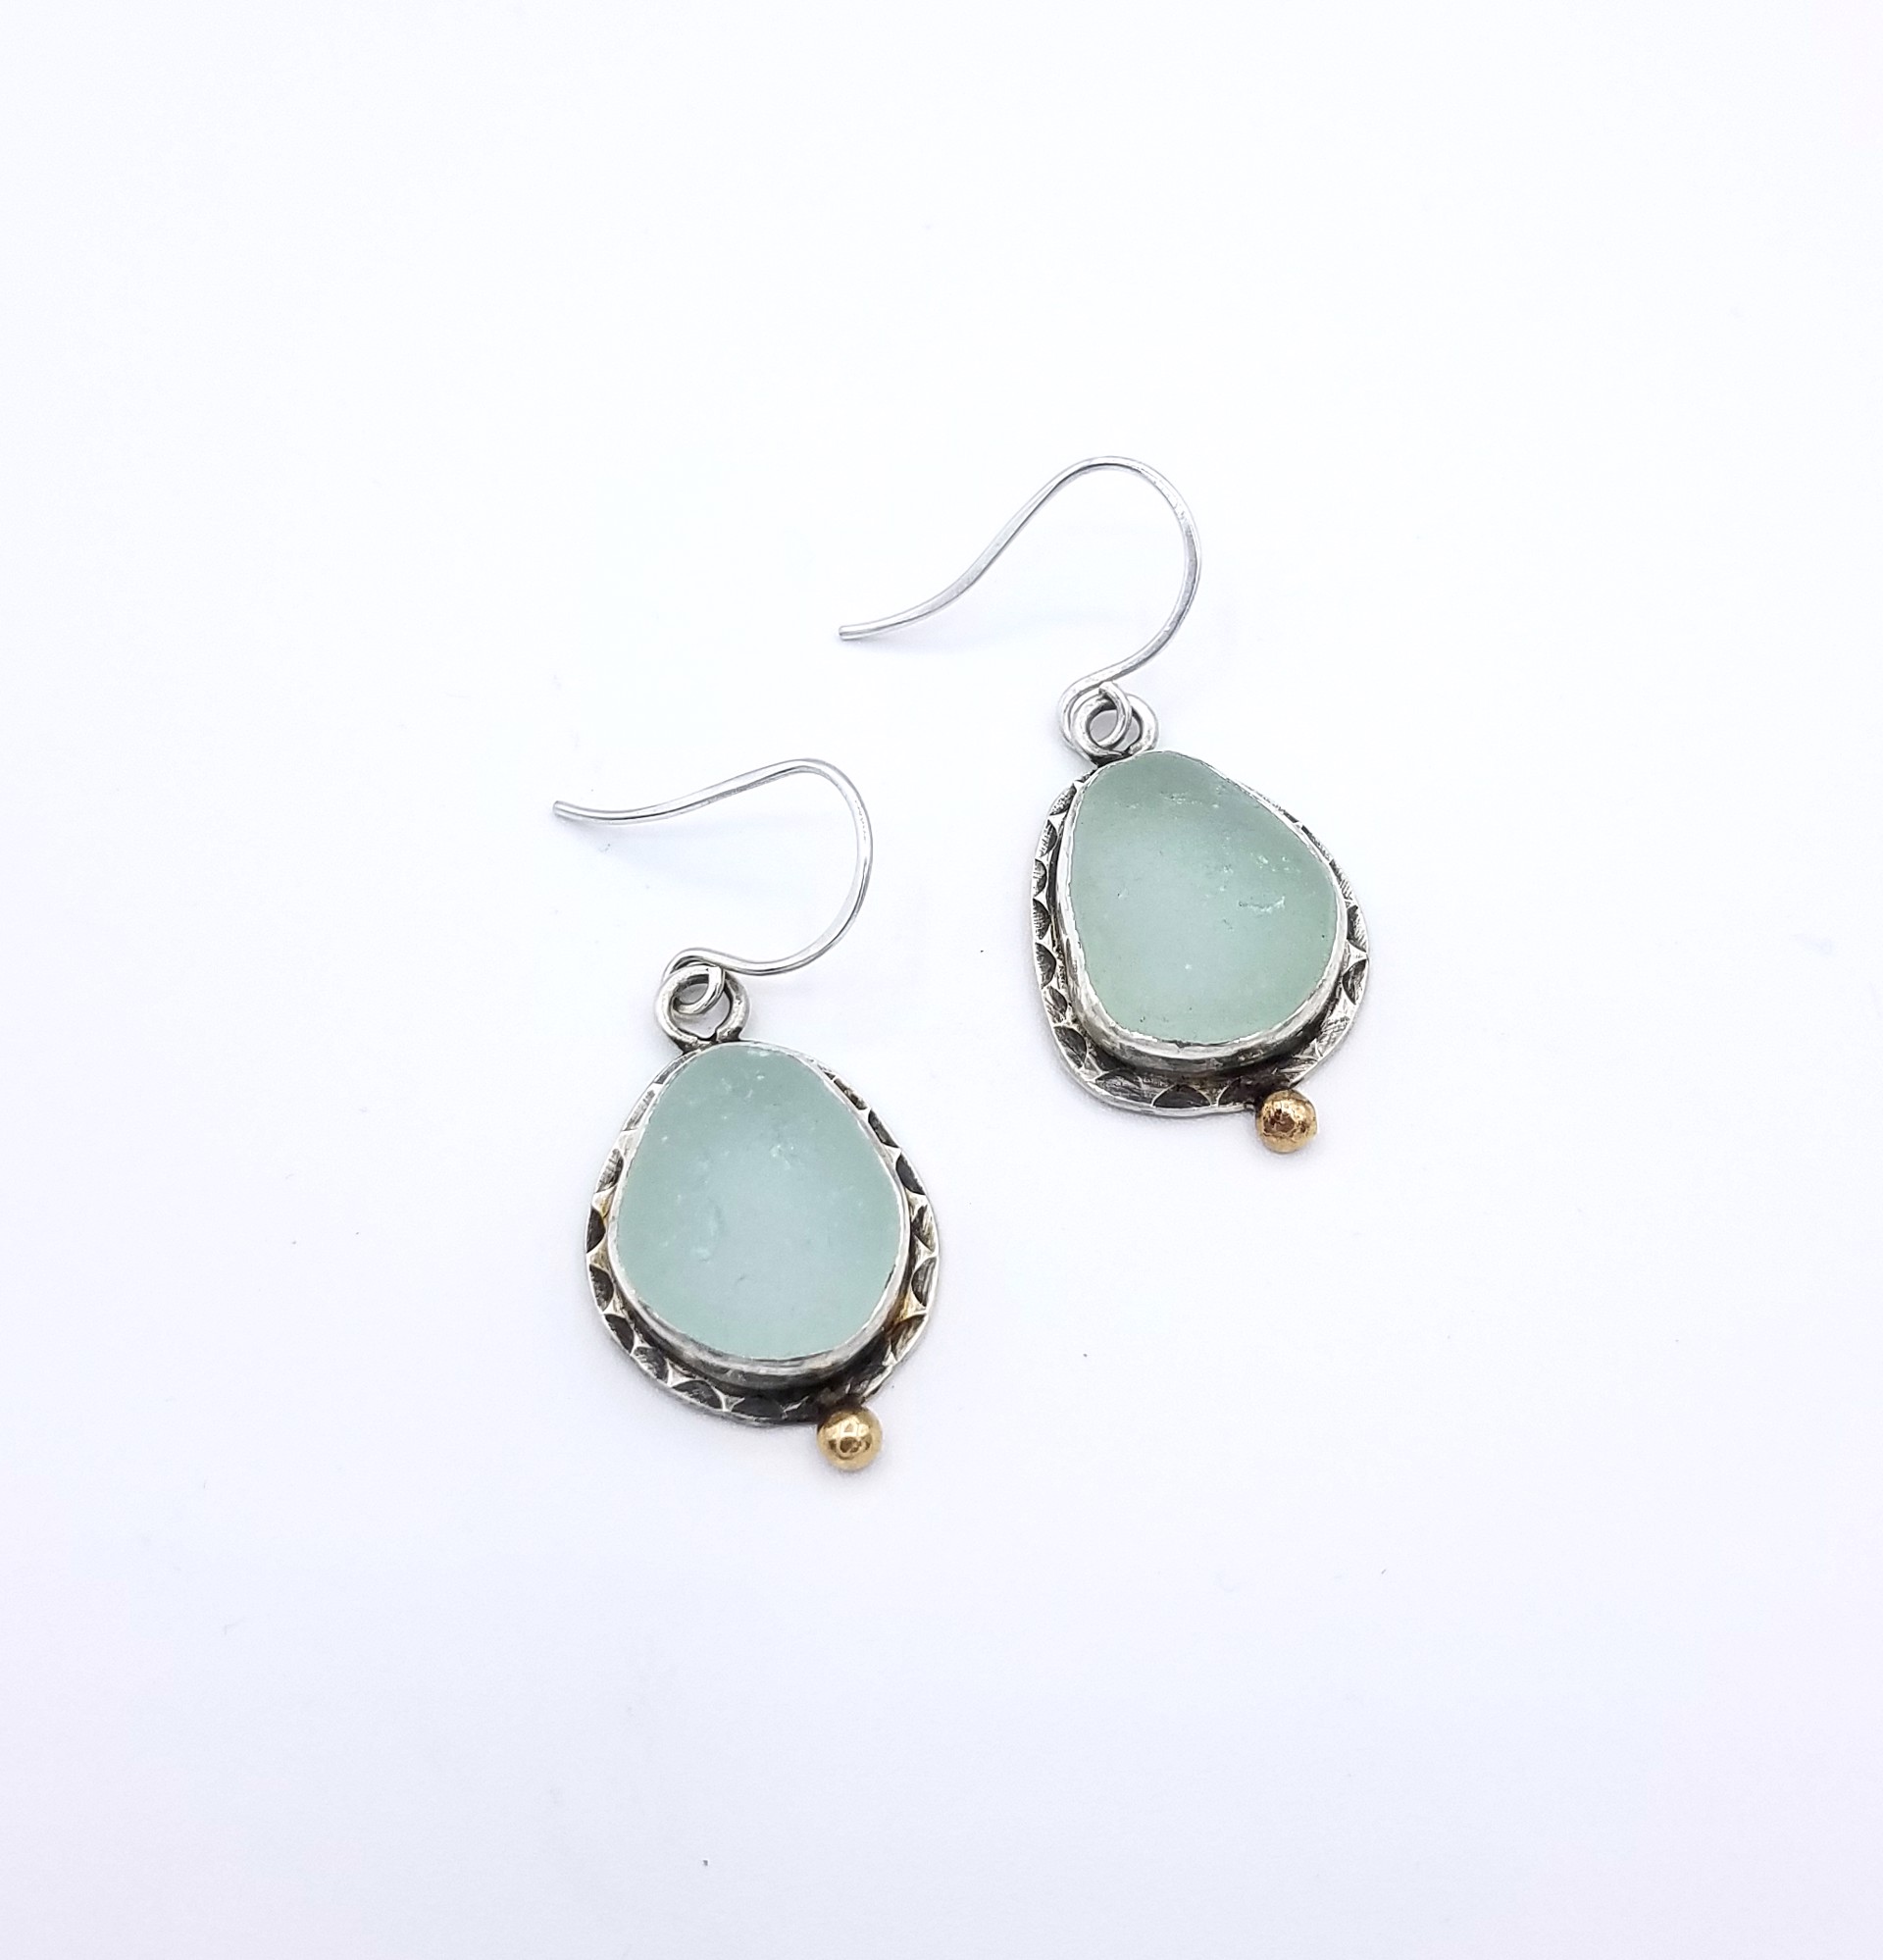 Thunder Cloud Blue Seaglass Earrings with Gold Dots by Judith Altruda